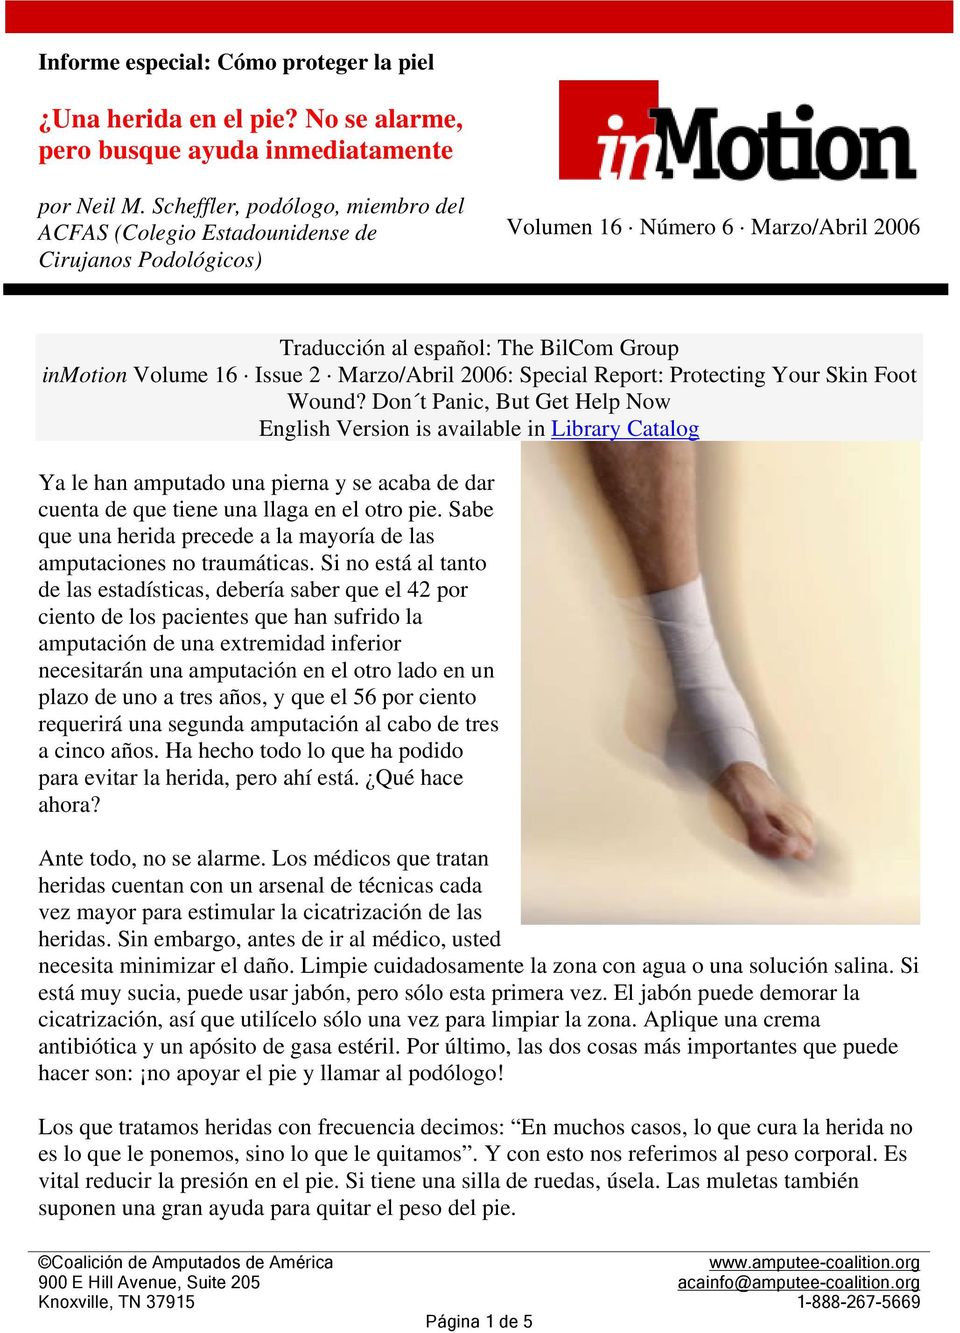 Marzo/Abril 2006: Special Report: Protecting Your Skin Foot Wound?